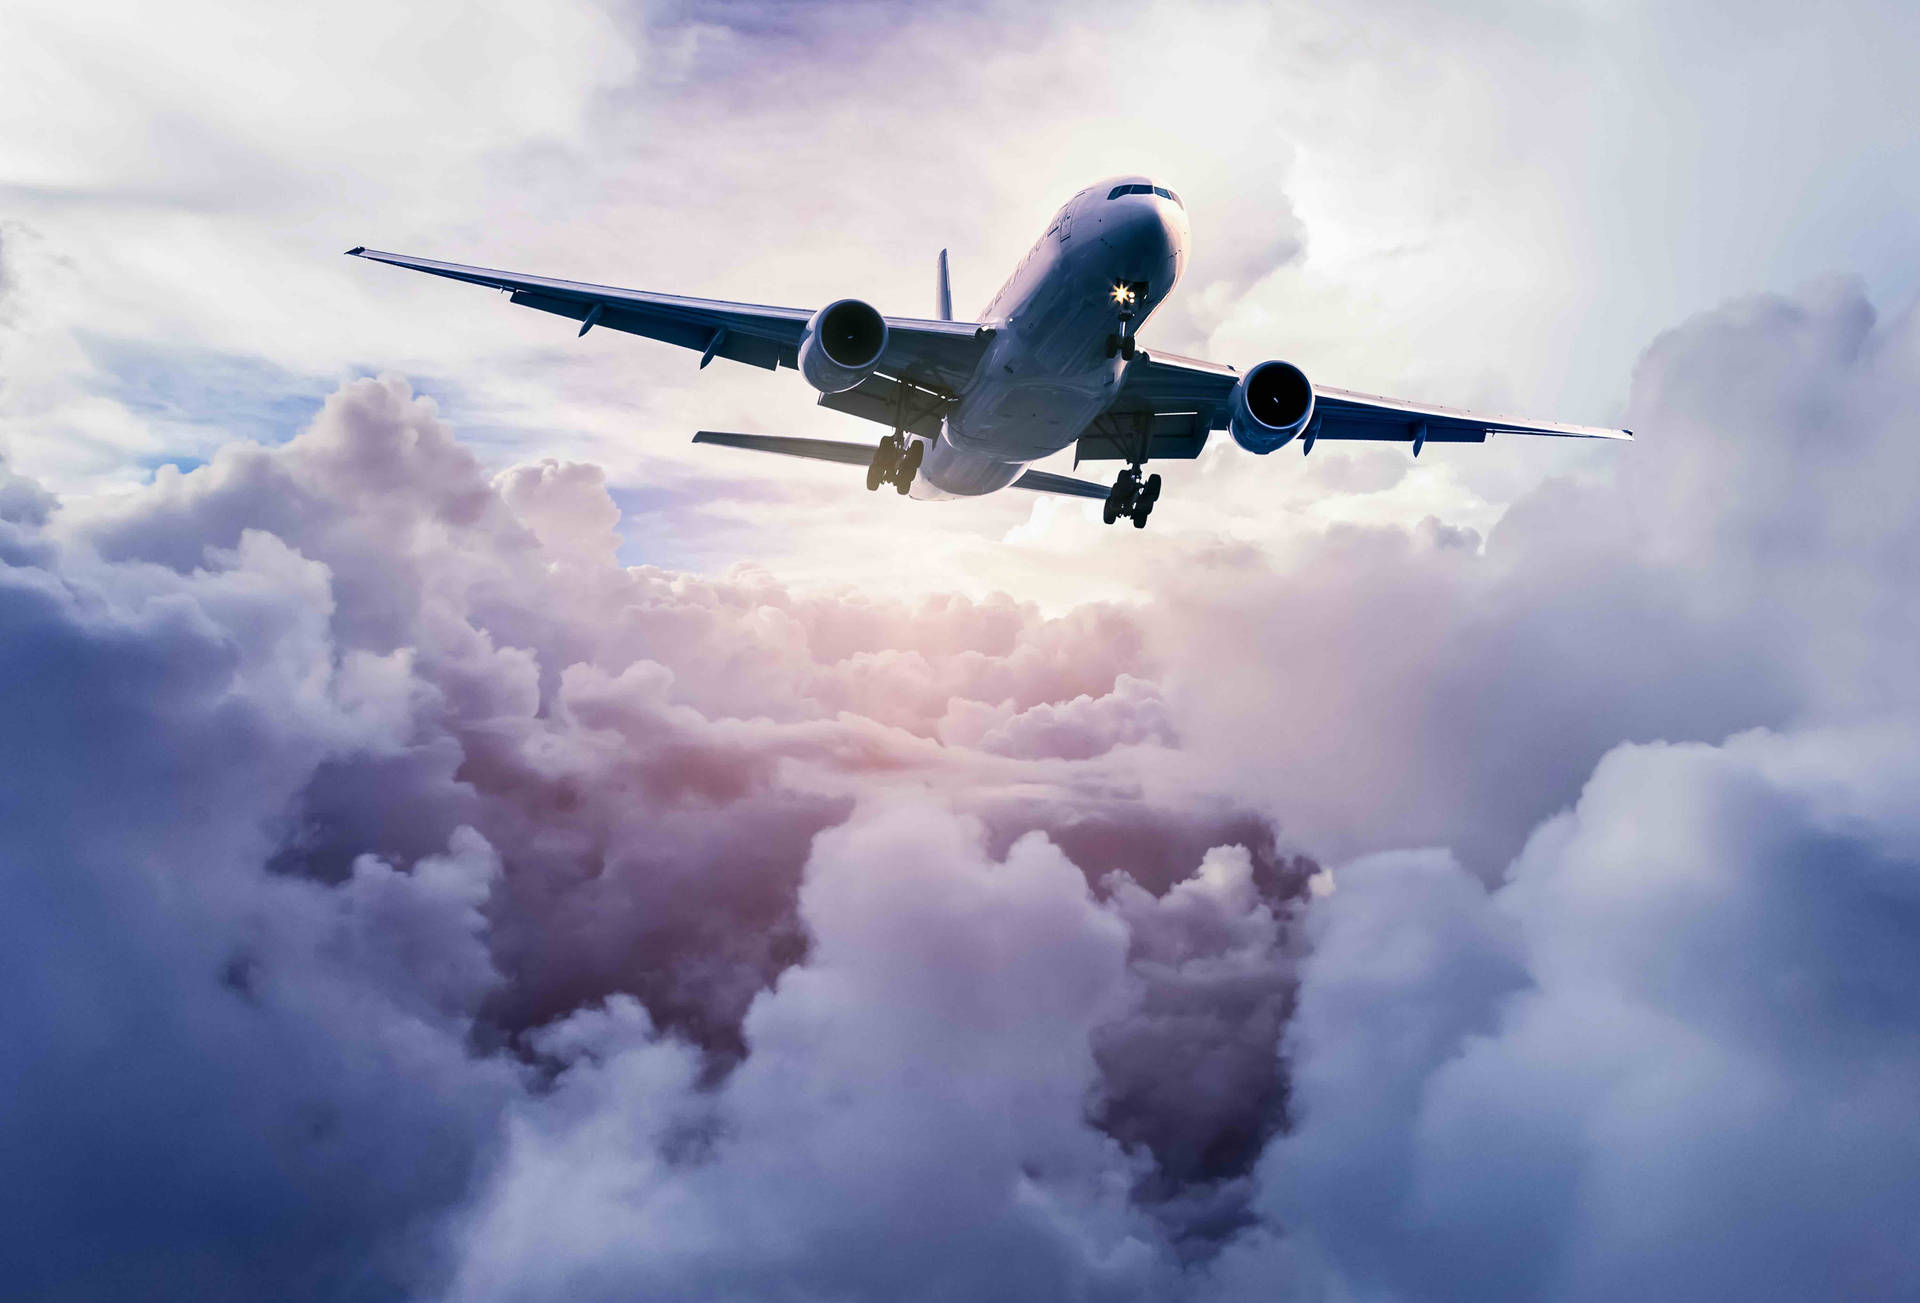 Google Flights Plane And Clouds Wallpaper